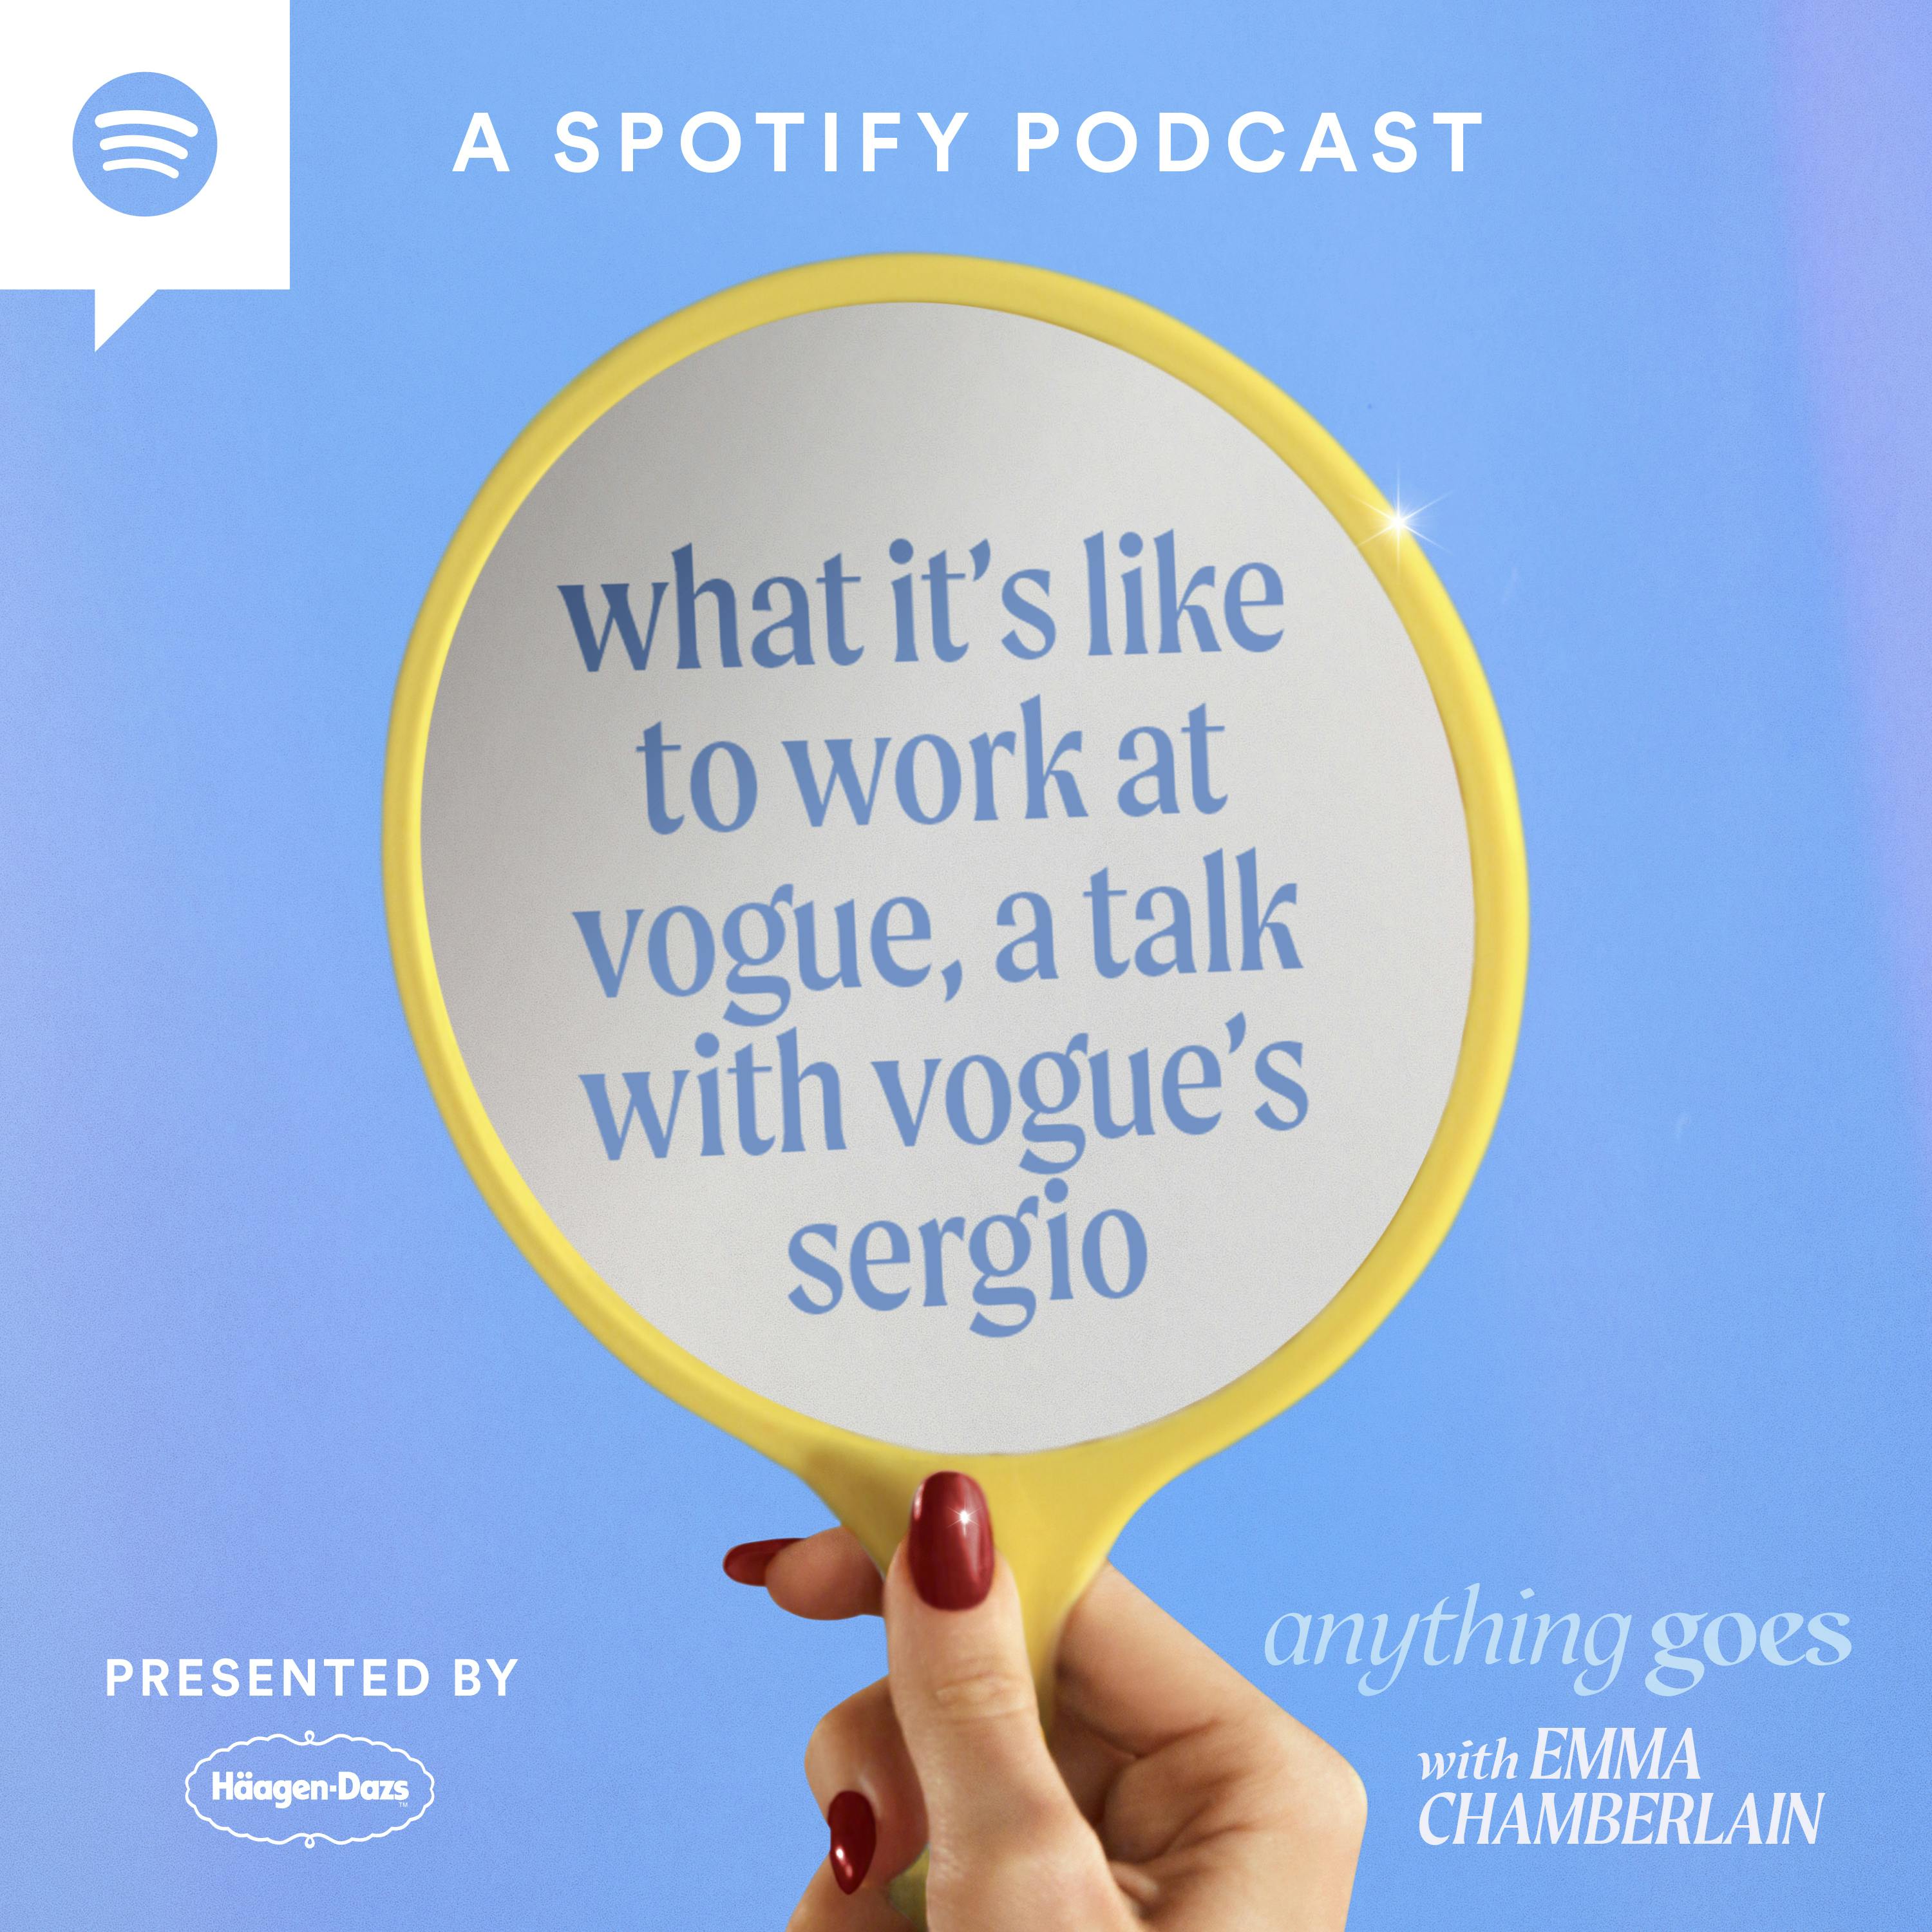 what it's like to work at vogue, a talk with vogue's sergio [video]